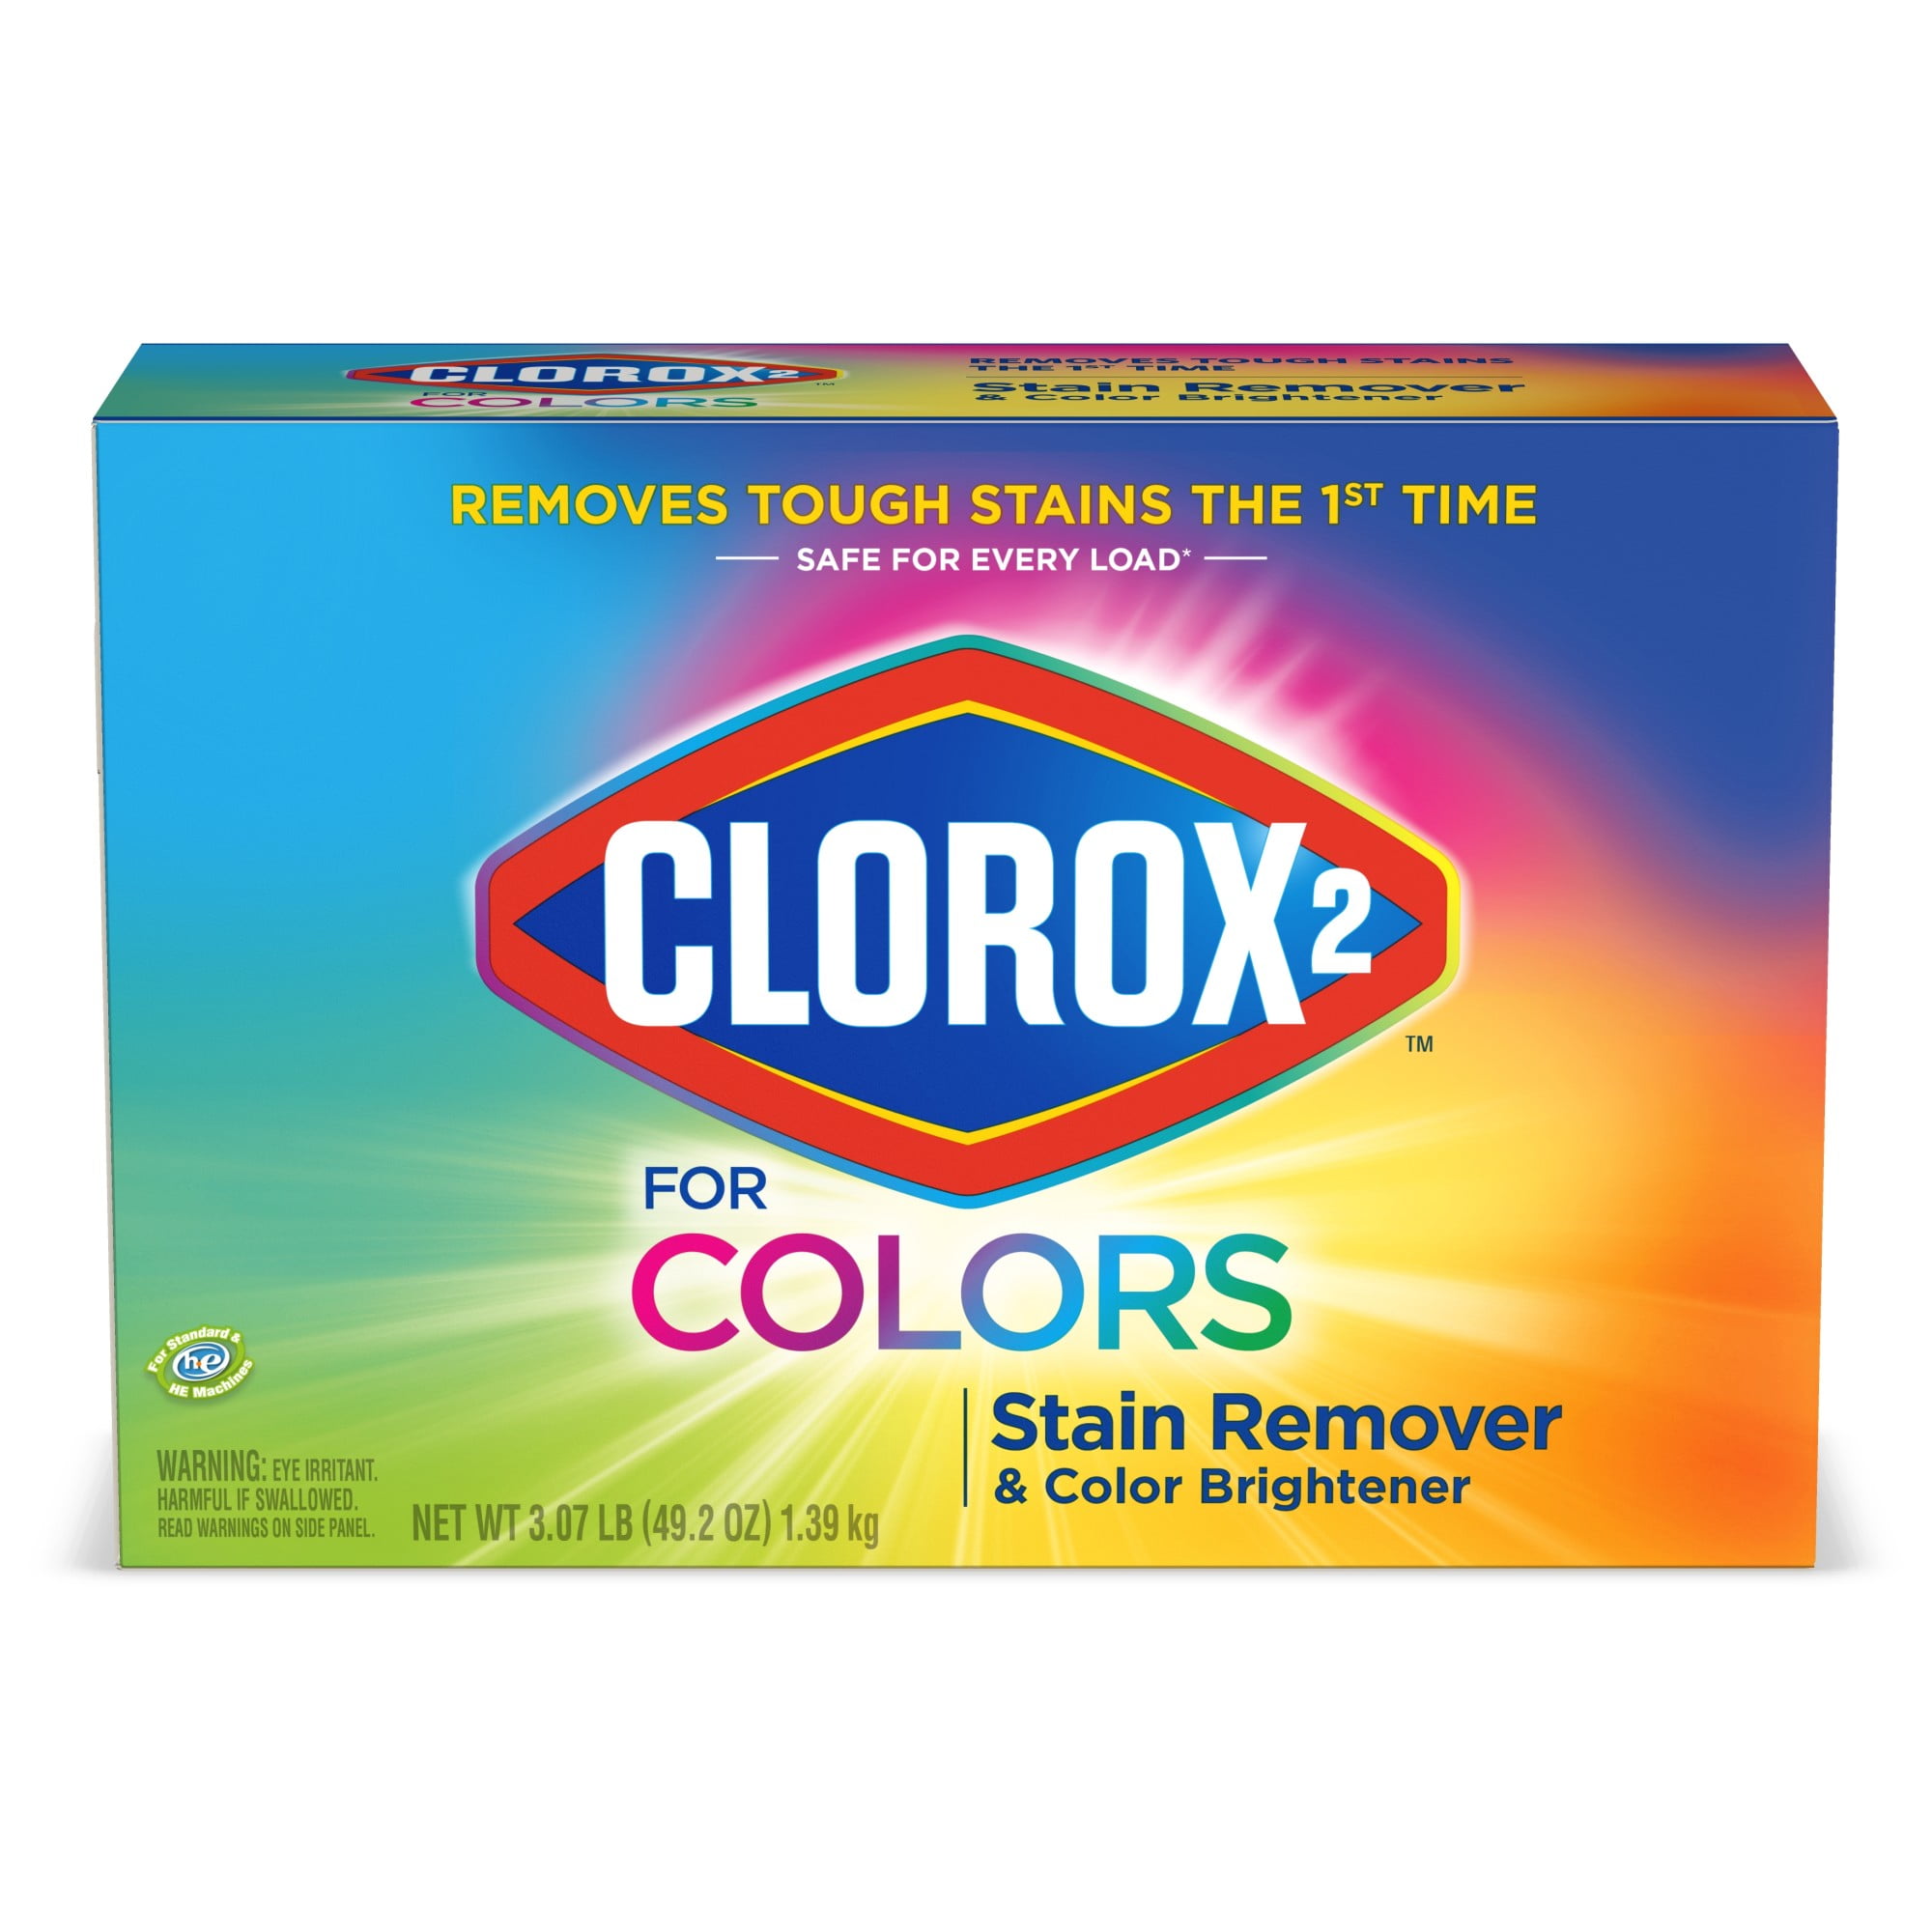 Clorox 2 for Colors Stain Remover and Color Brightener Powder - 49.2